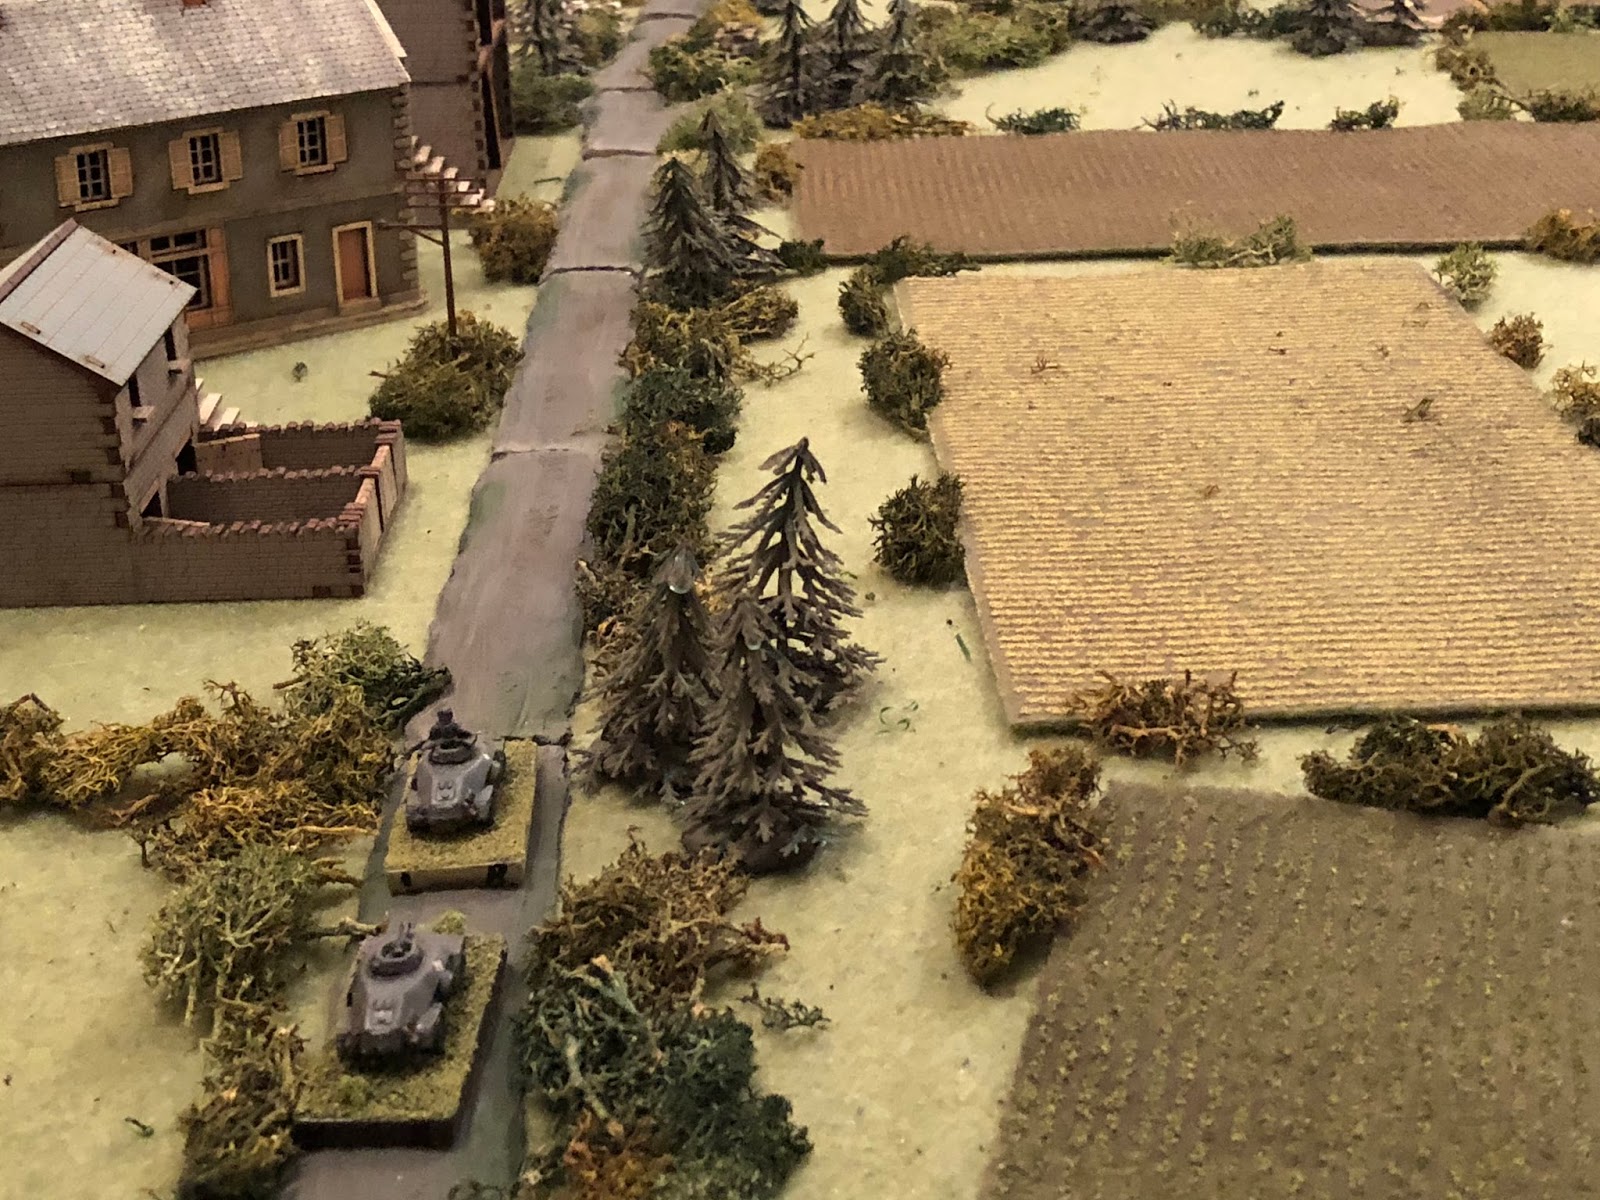  Hearing the reassuring roar of Panzer III engines coming up on his right (off camera to bottom right), Lt Weidner and Cpl Edst cautiously advance their armoured cars up main street, almost reaching the Granary (top left). &nbsp;Lt Weidner spots some